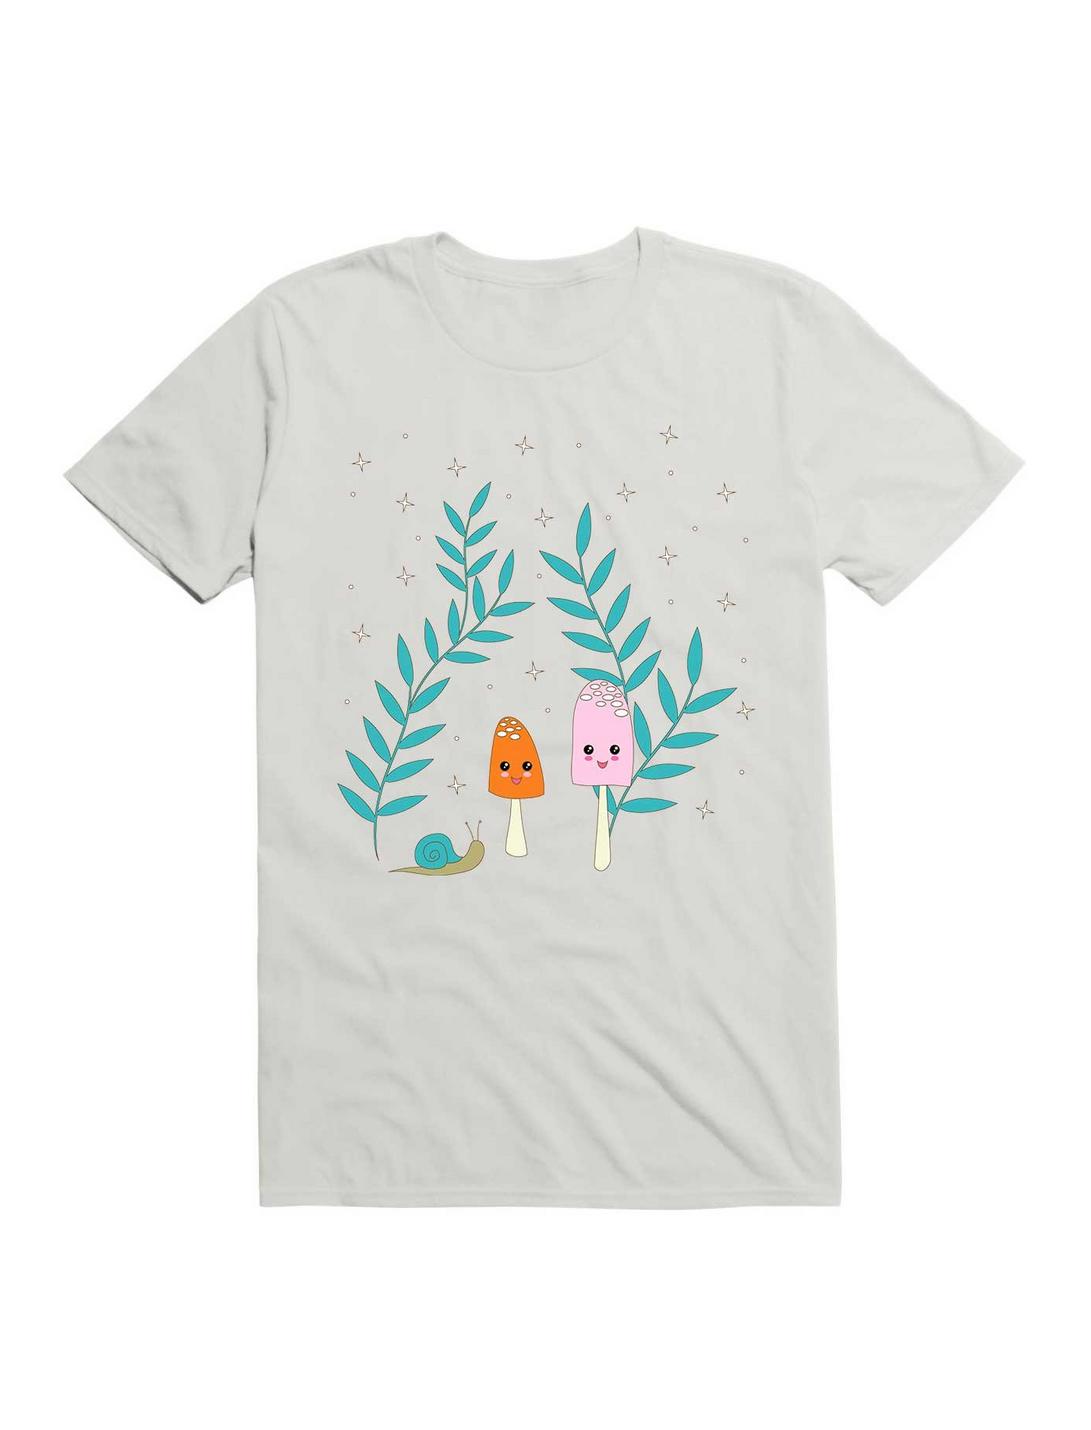 Kawaii Mushrooms In The Forest With Snail T-Shirt, WHITE, hi-res